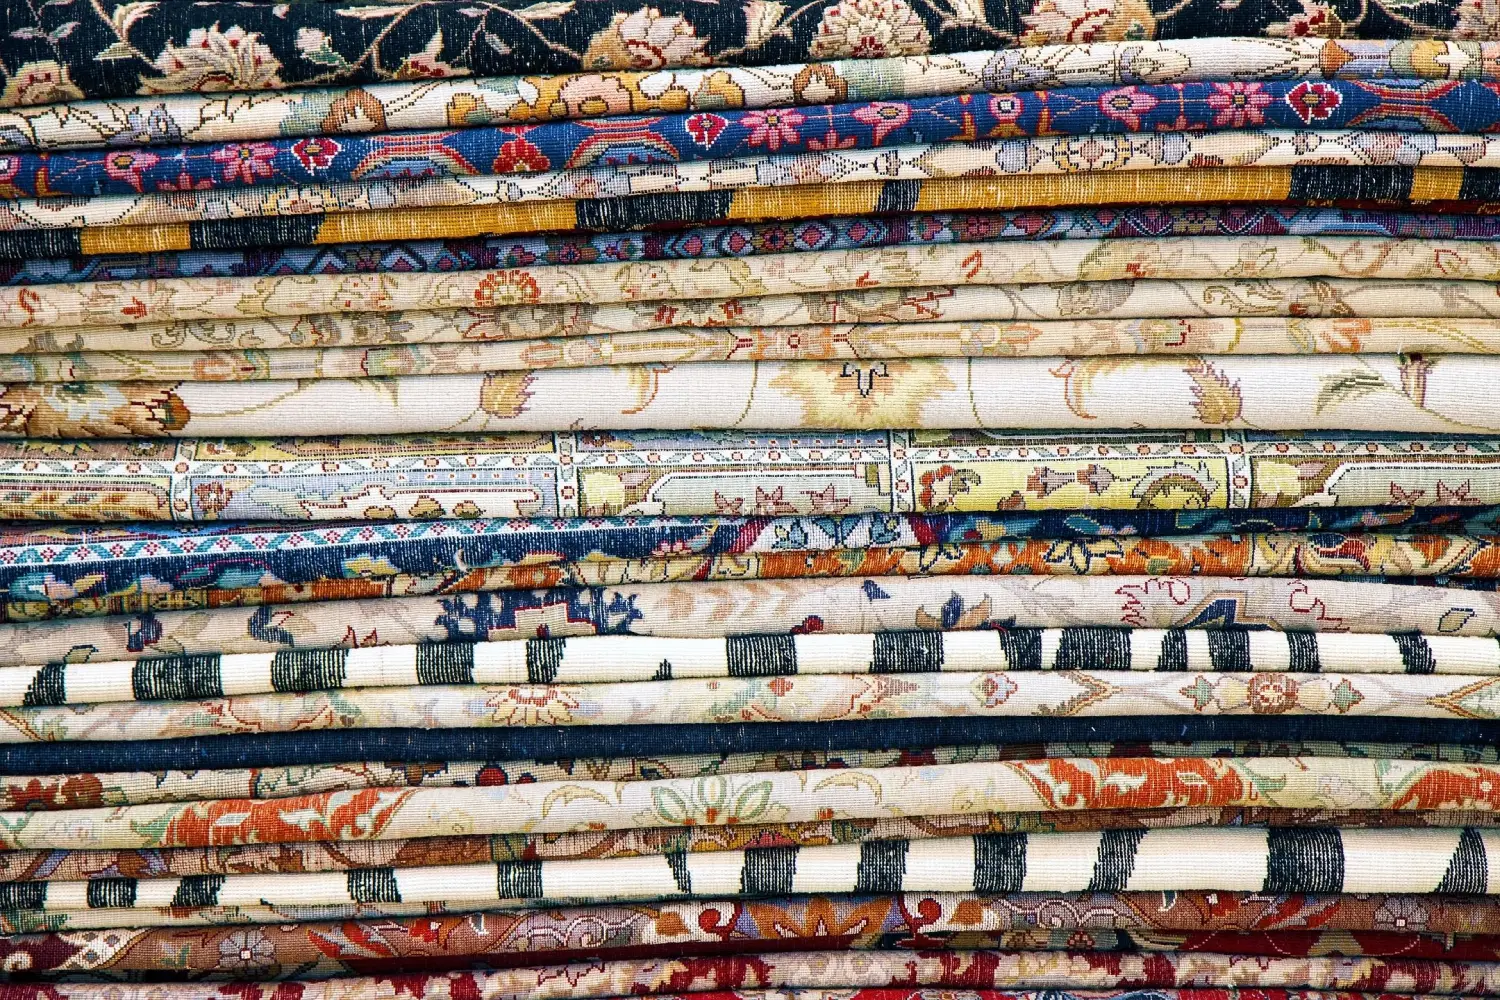 A stack of fabric is shown in this image.